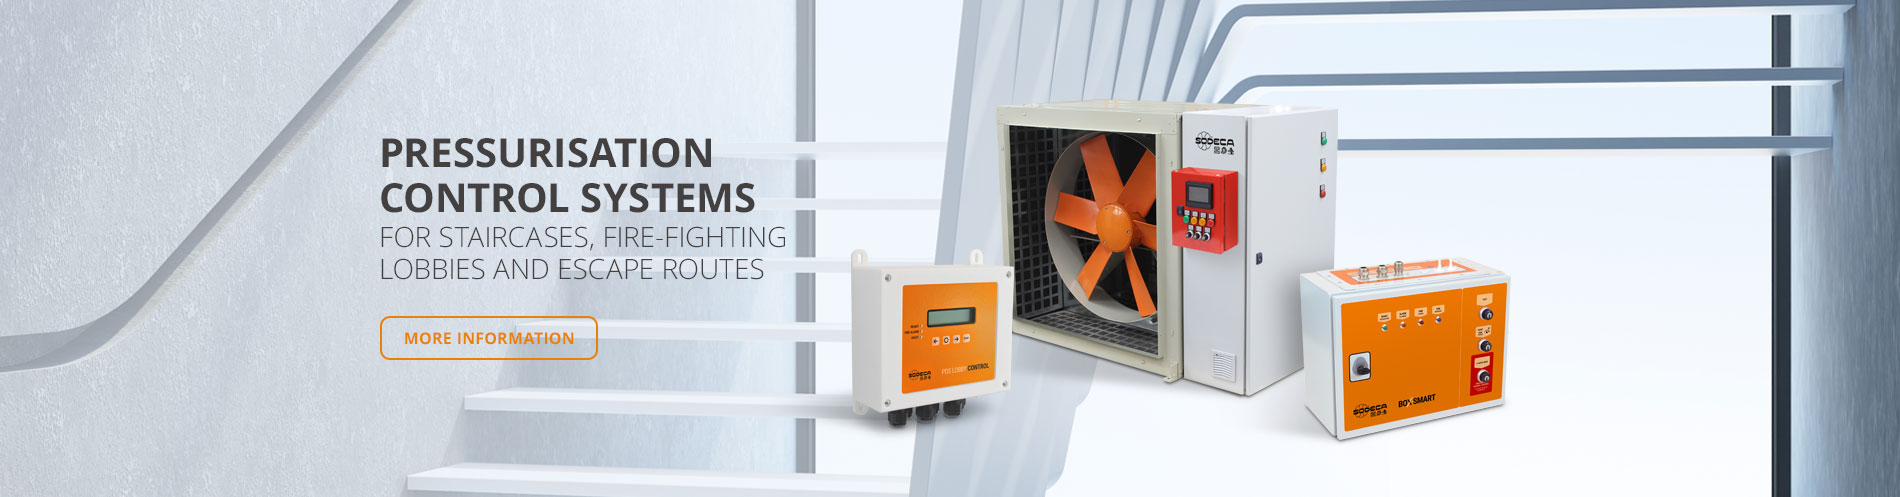 Pressurisation control systems for staircases, fire-fighting lobbies and escape routes